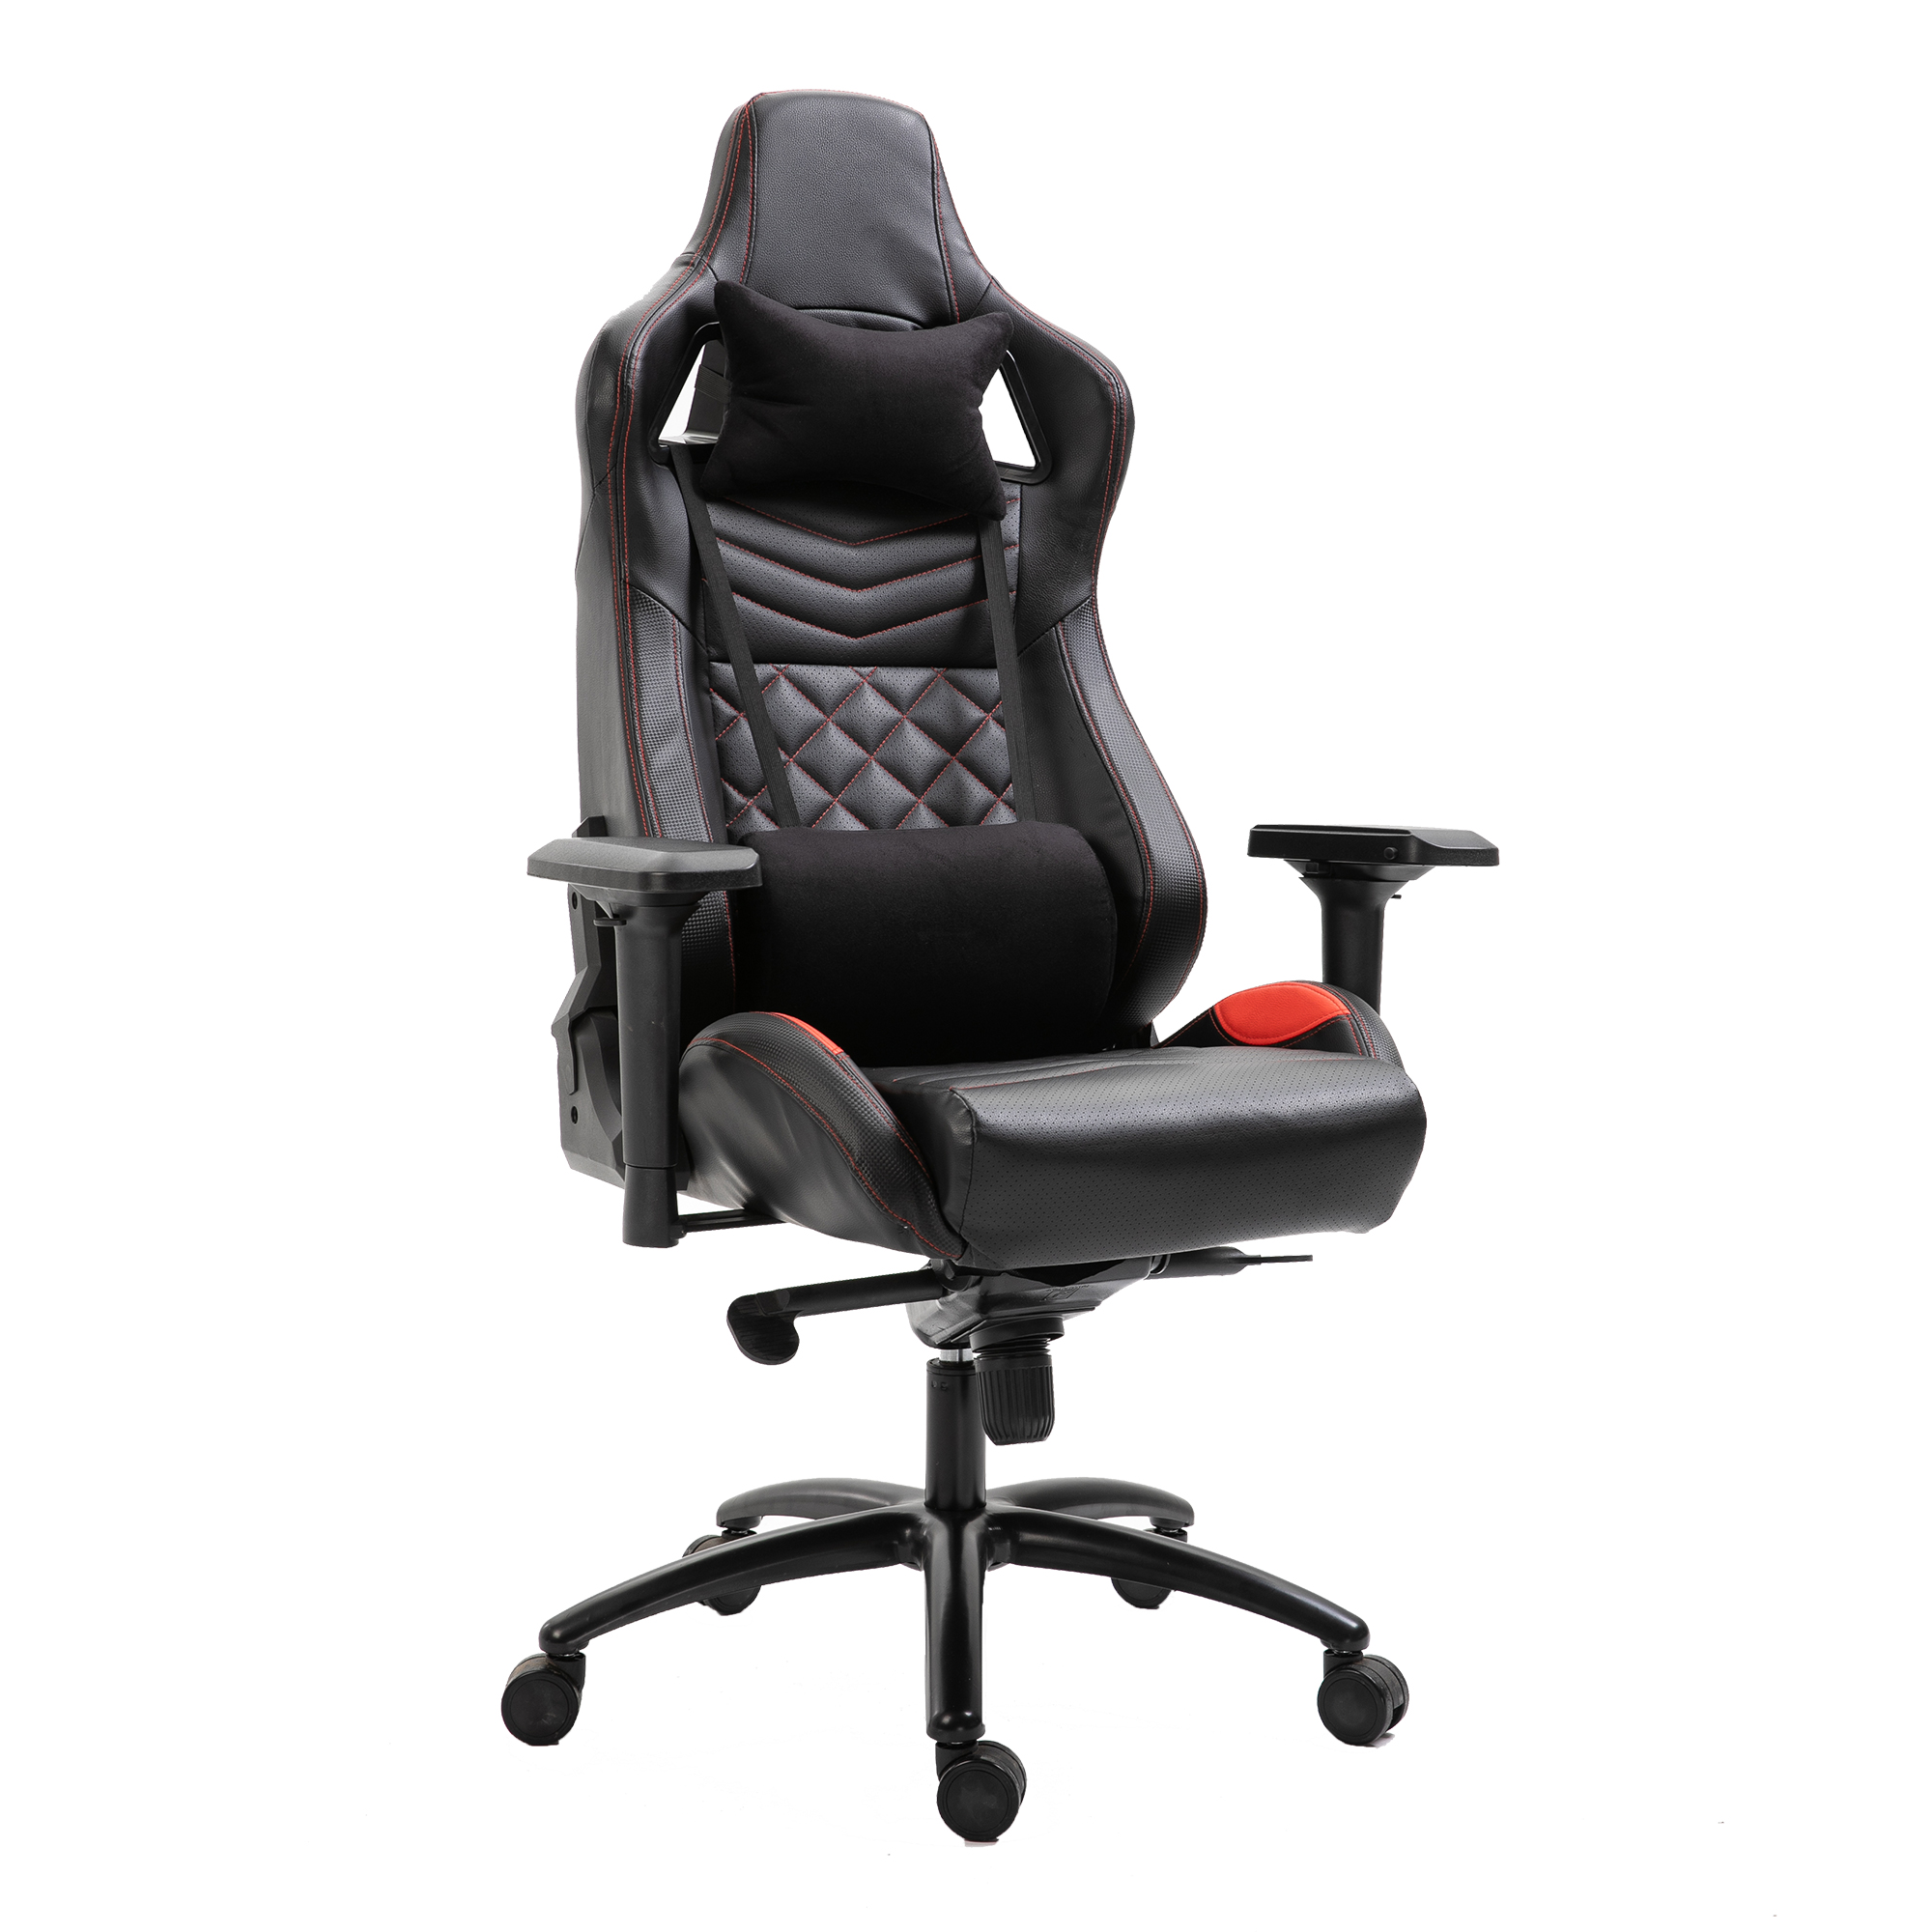 Comfortable adjustable leather PC games racing gaming chair Featured Image